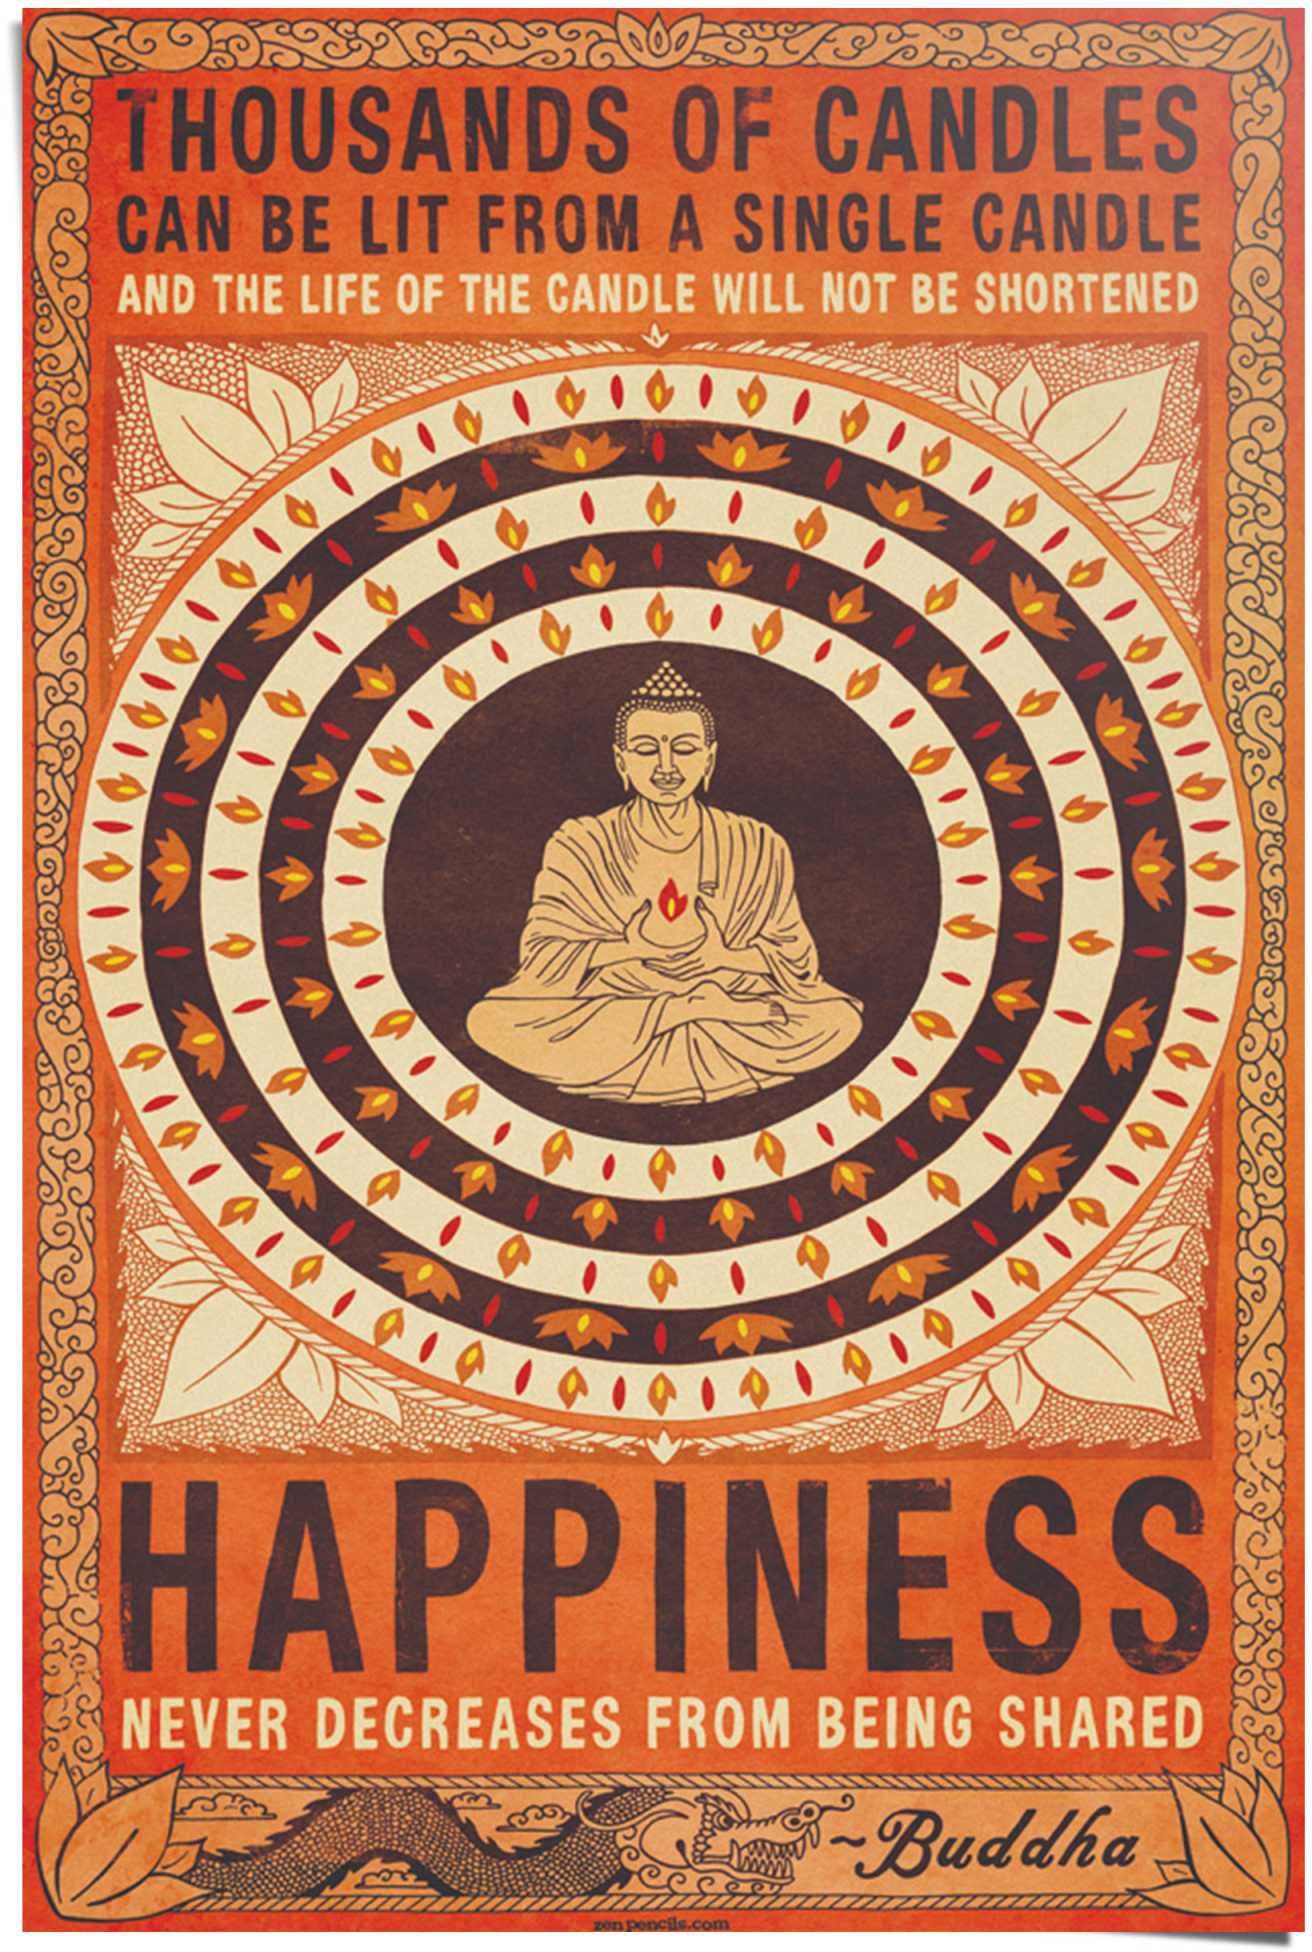 Reinders! Happiness, St) Poster Buddha (1